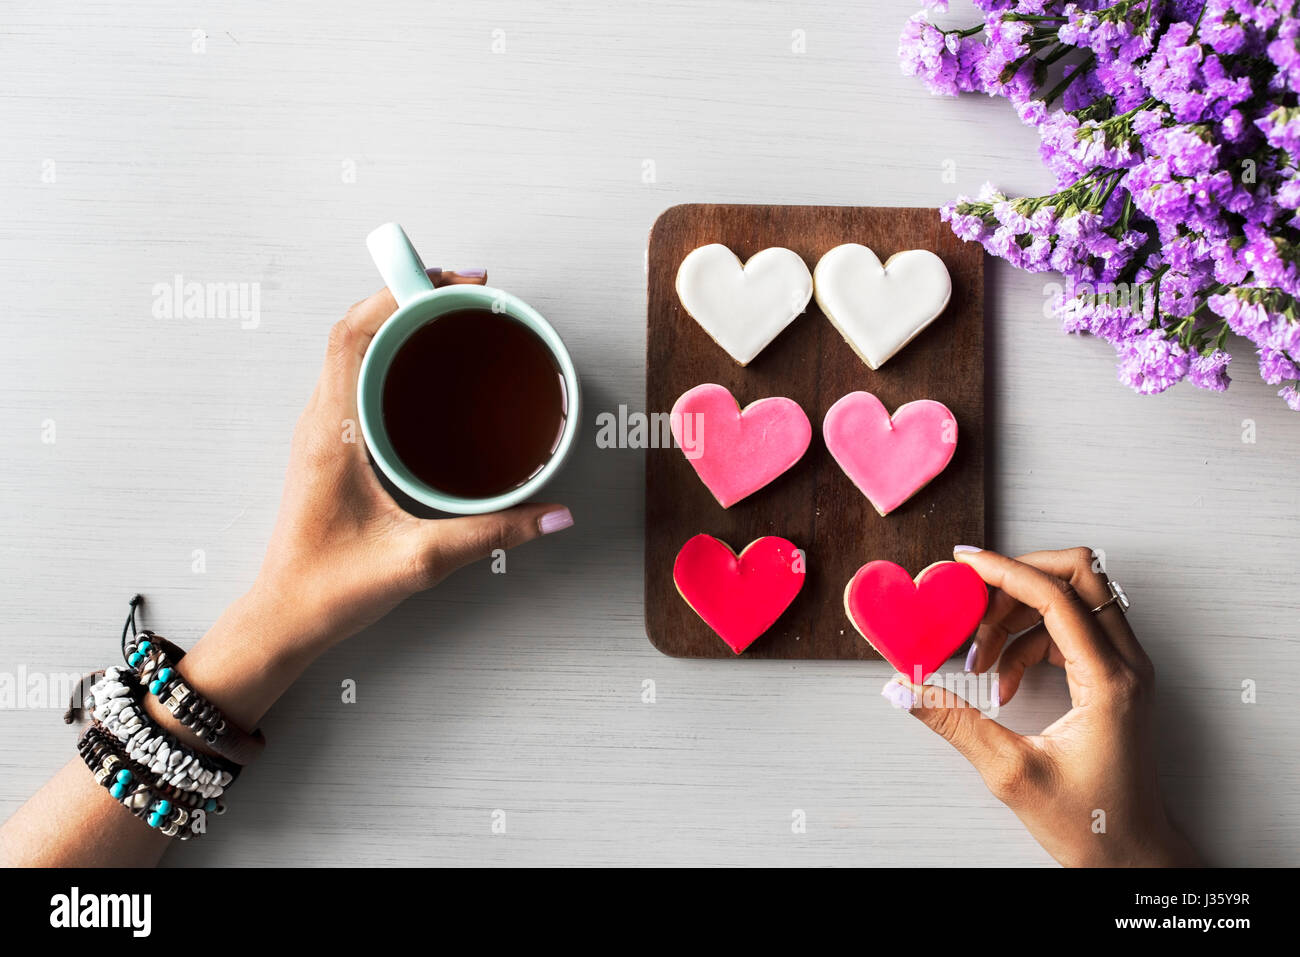 People Hands Showing Heart Shape Cookies with Coffee Cup Stock Photo